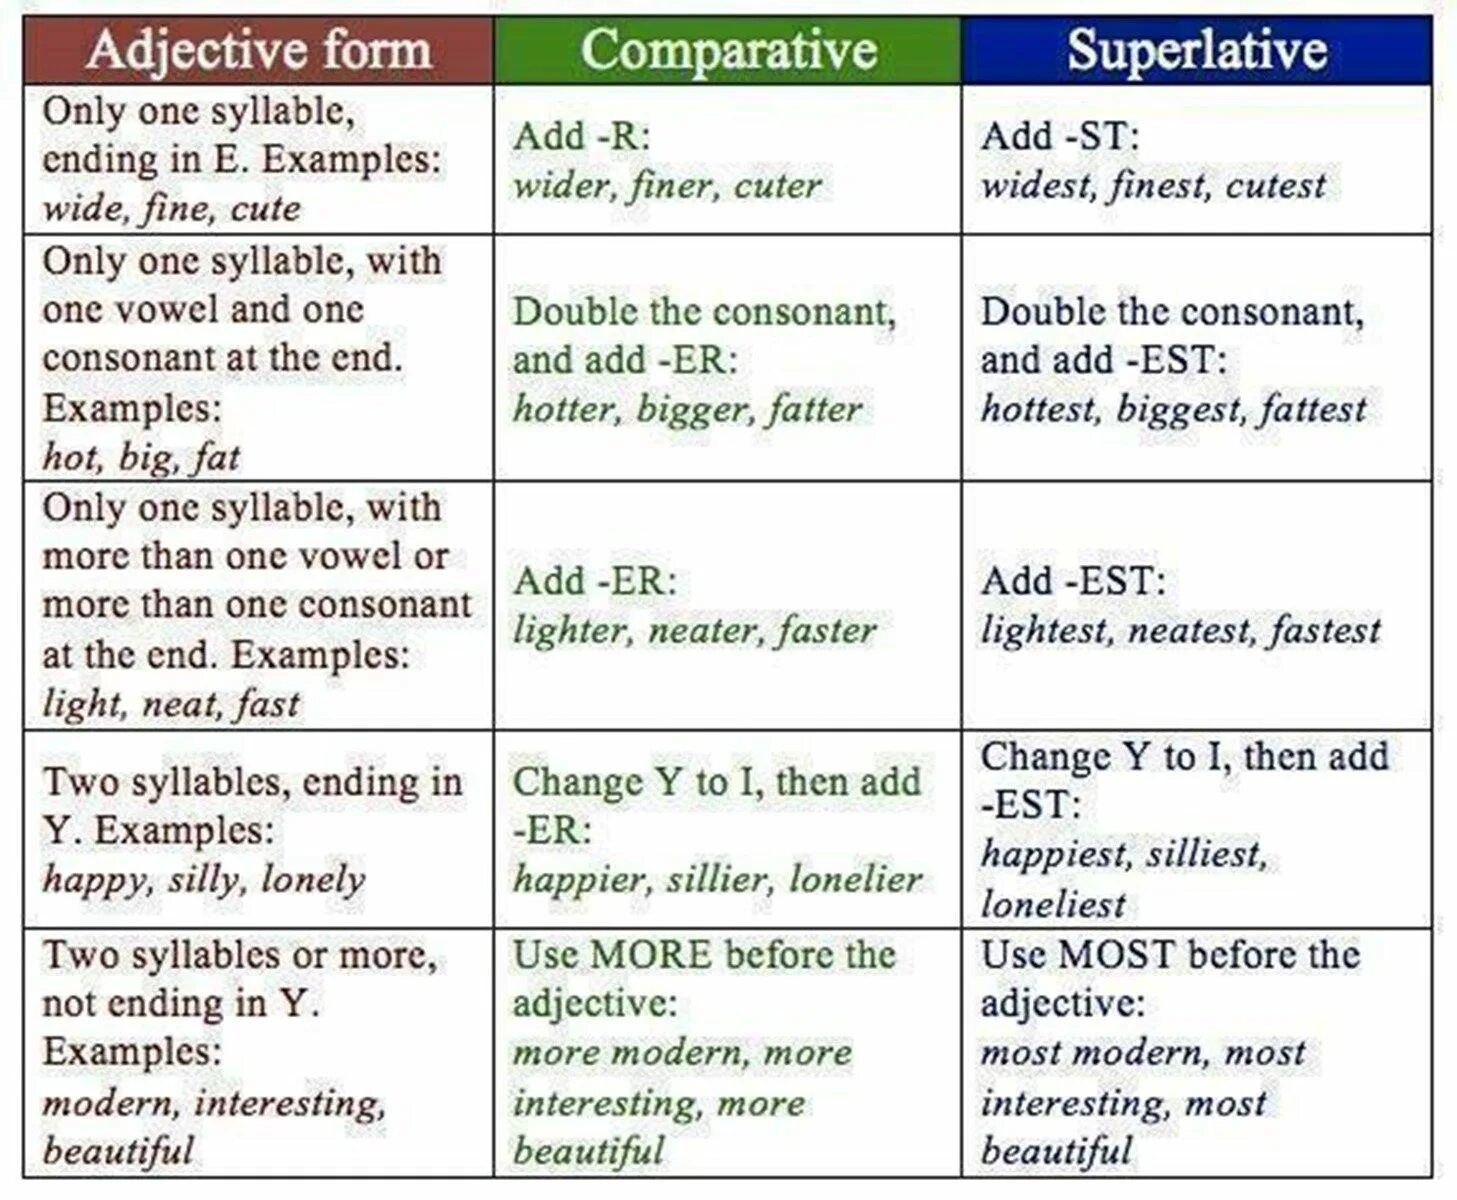 Much or many faster. Comparatives and Superlatives правило таблица. Adjective Comparative Superlative таблица. Английский Comparative and Superlative. Таблица Comparative and Superlative.